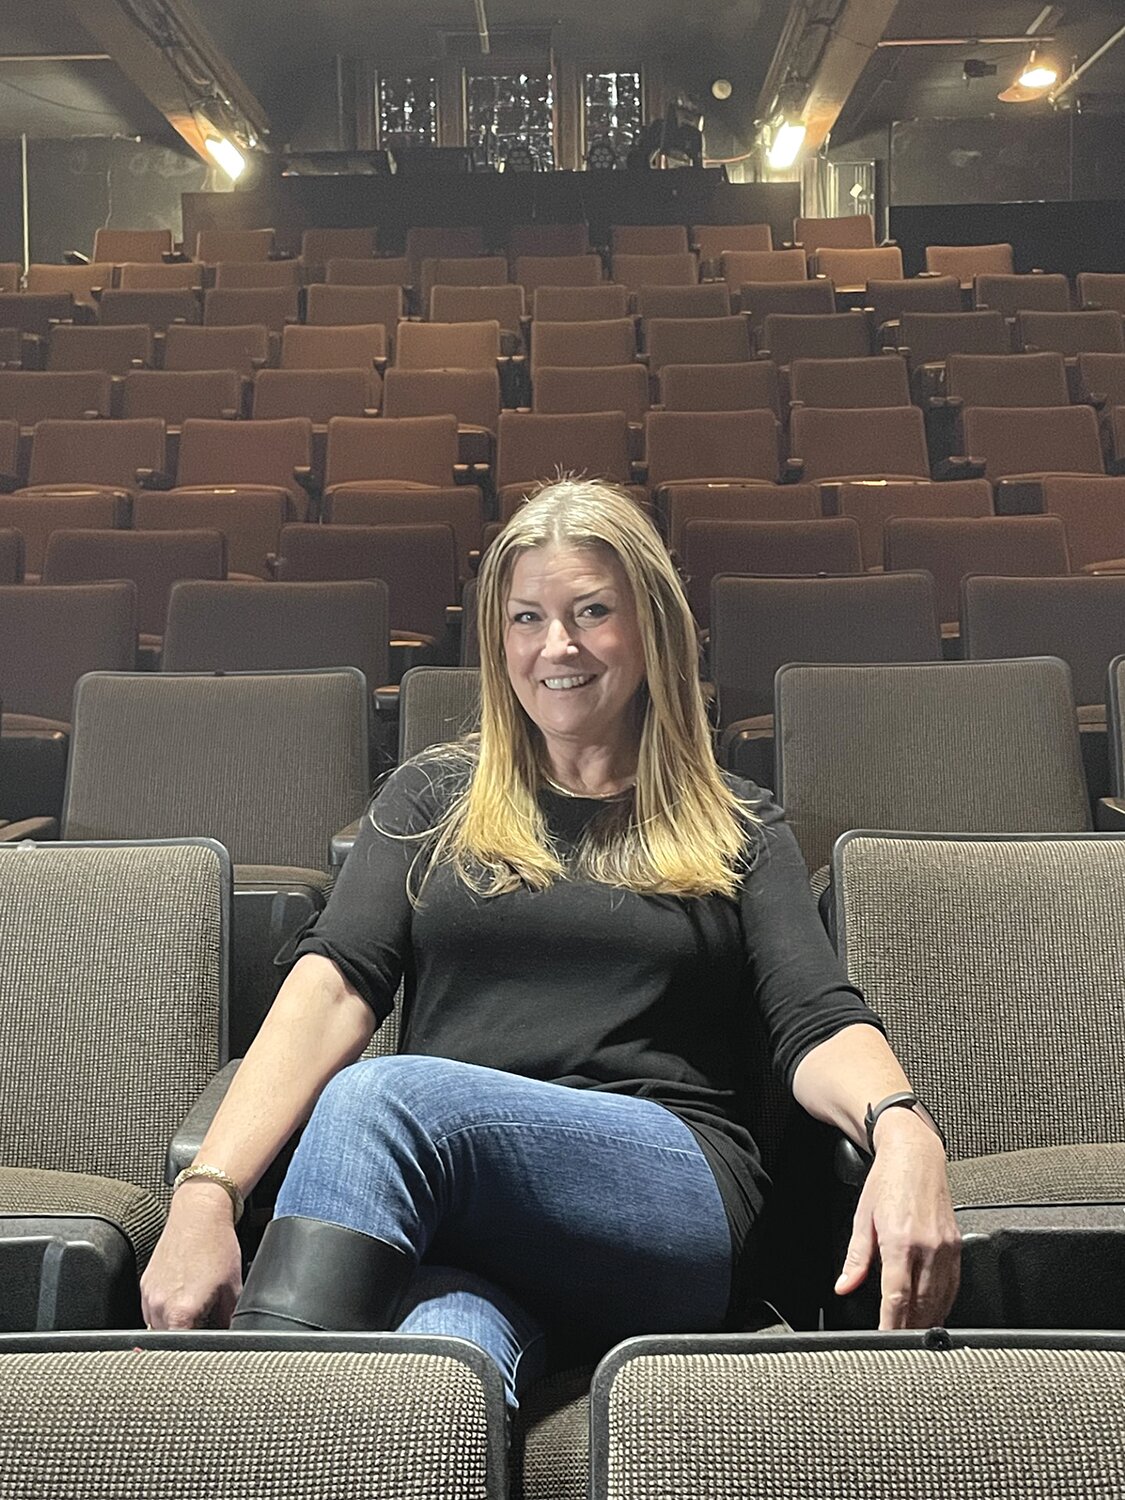 Dena Davis, co-founder and artistic director for Arts Alive!, is giddy about the possibilities for the newly renovated theater space at In Your Ear Records (formerly home to Second Story Theatre) in Warren.